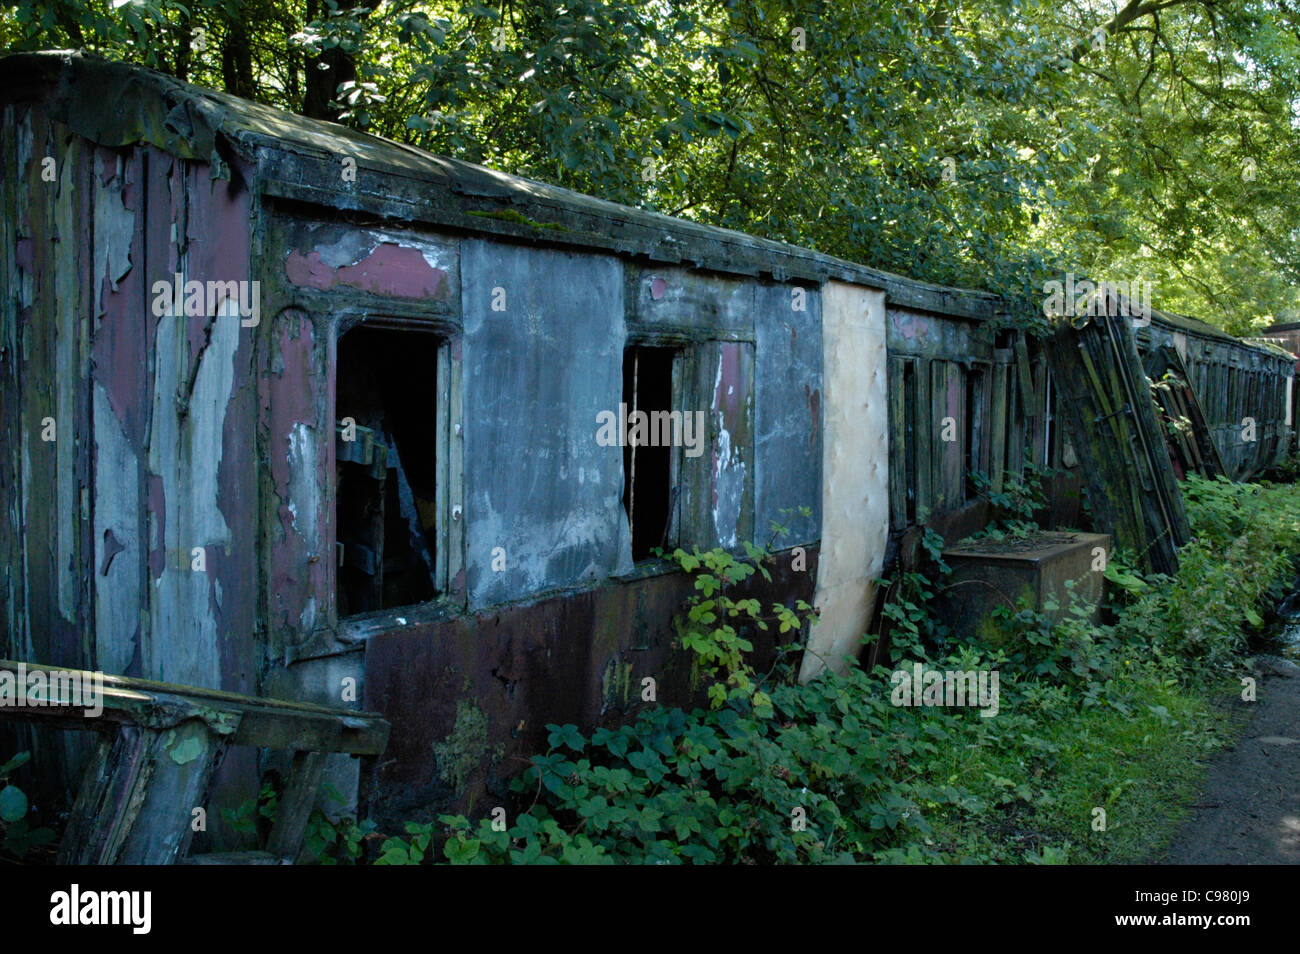 Derelict old carriages awaiting restoration on the Midland Railway heritage line, England, UK Stock Photo